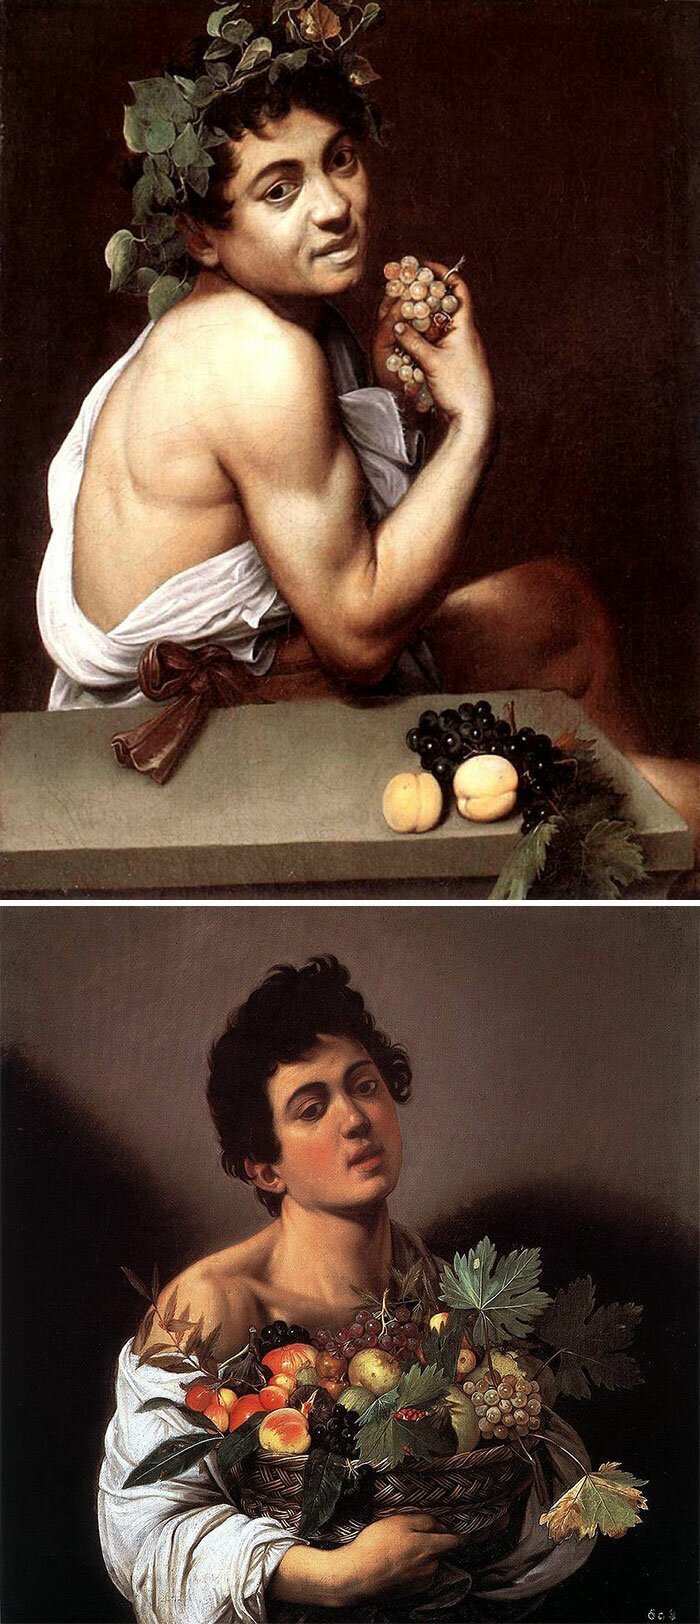 #14 If All The Men Look Like Cow-Eyed Curly-Haired Women, It’s Caravaggio